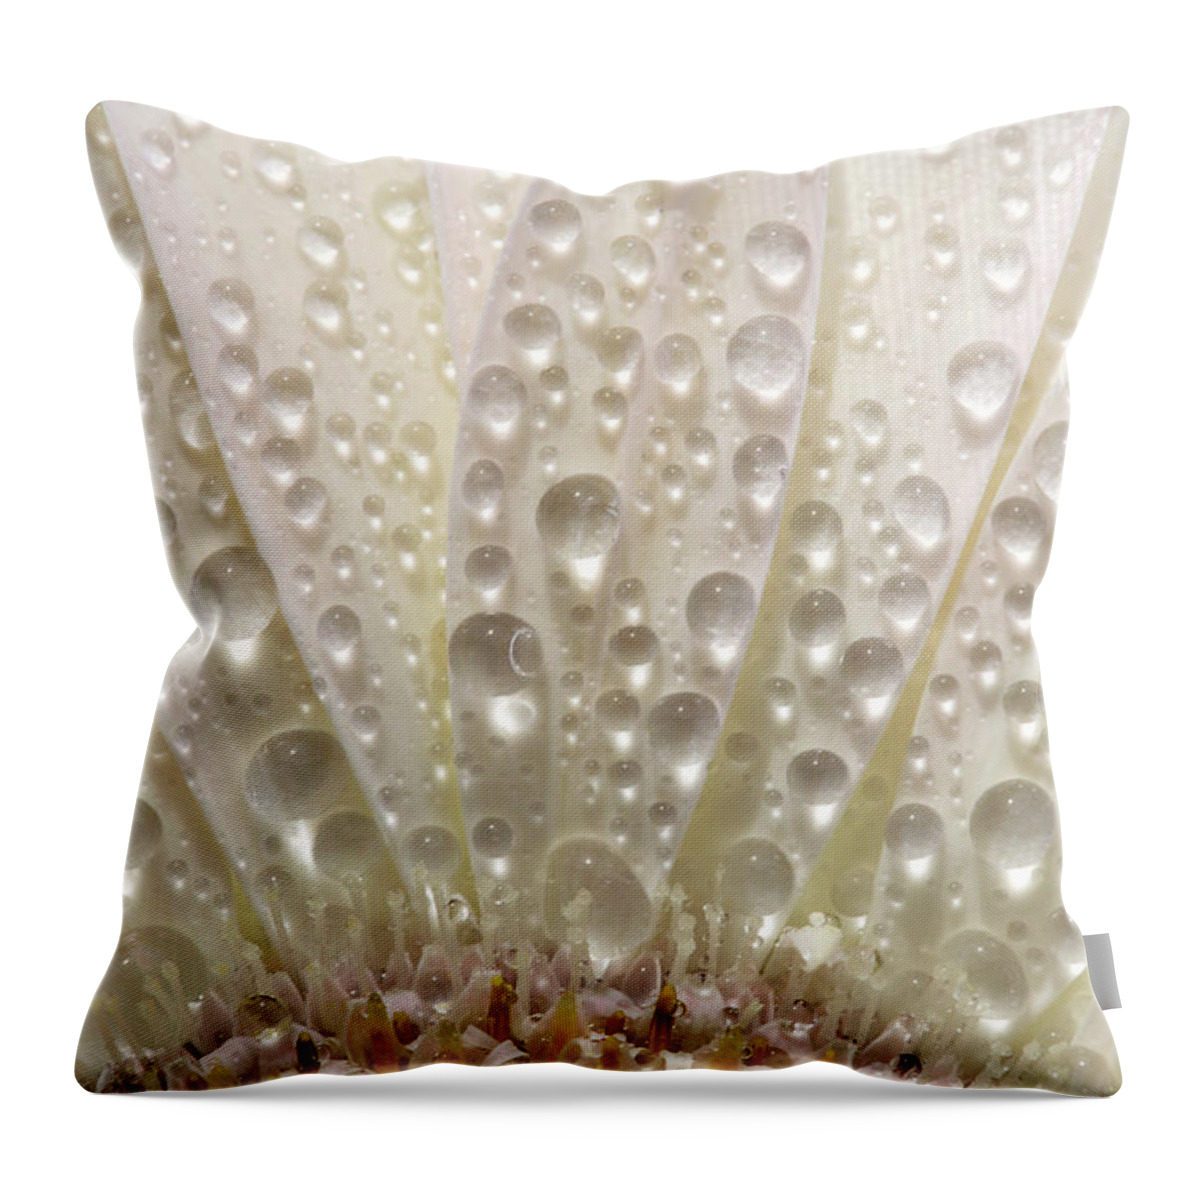 Daisy Throw Pillow featuring the digital art Macro close up of a daisy flower by Mark Duffy